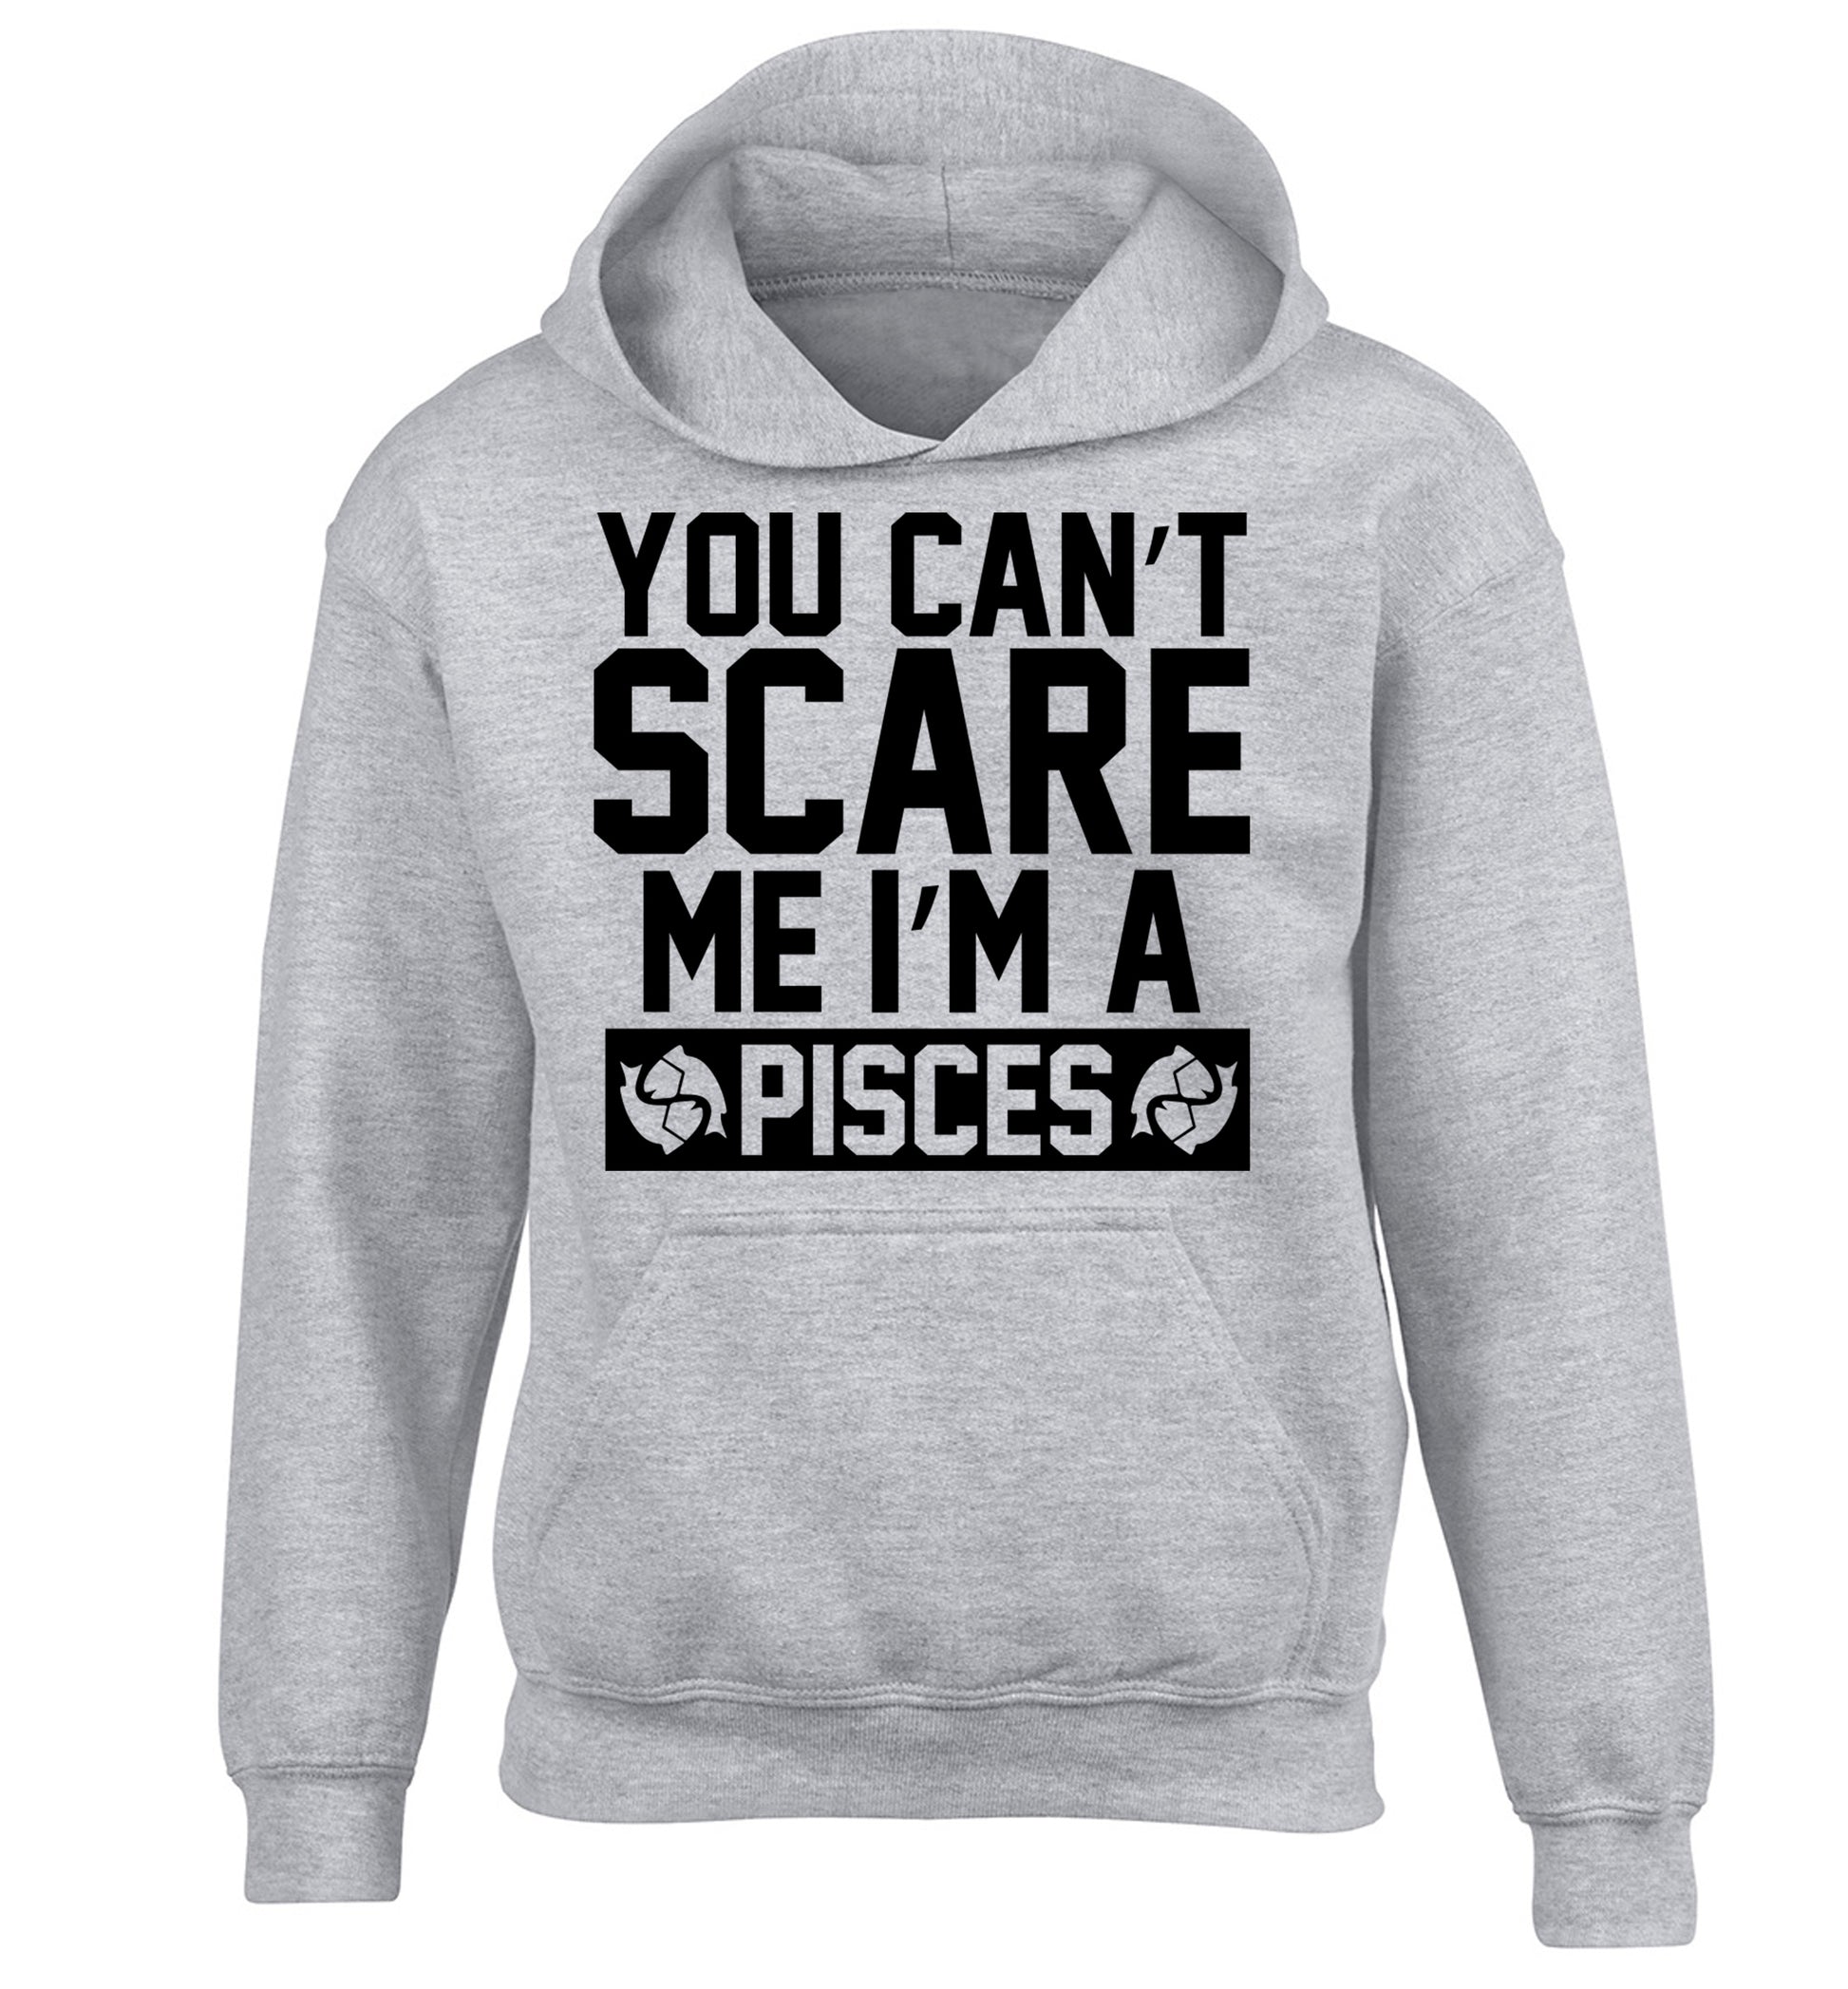 You can't scare me I'm a pisces children's grey hoodie 12-13 Years